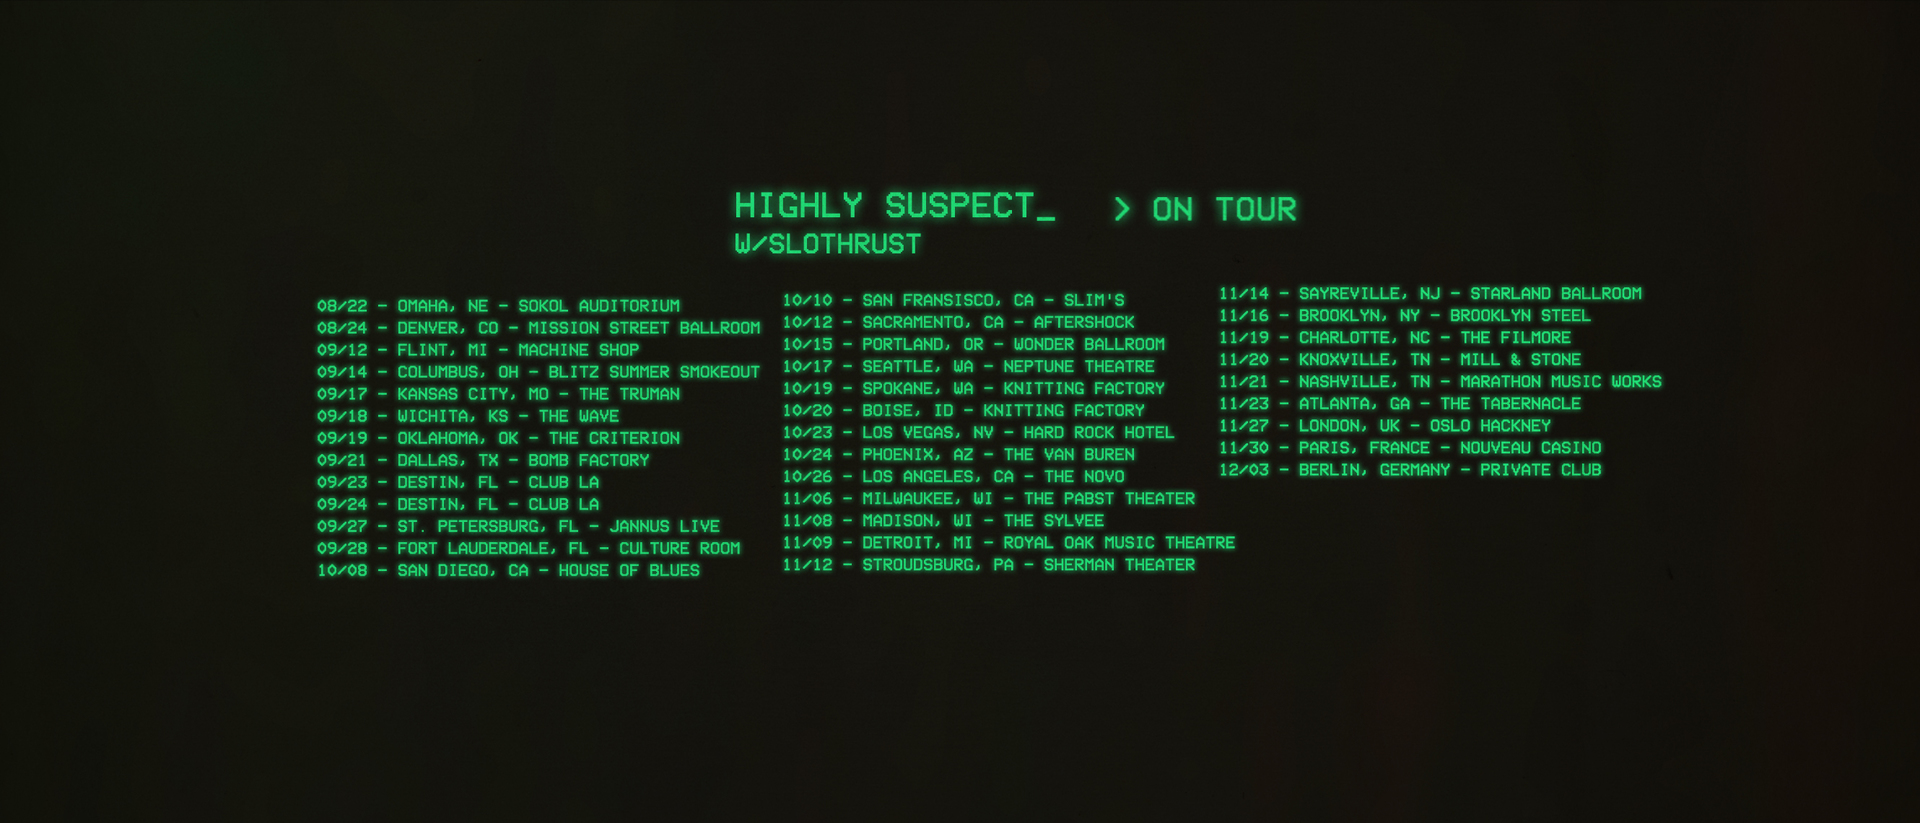 Highly Suspect Tour Dates